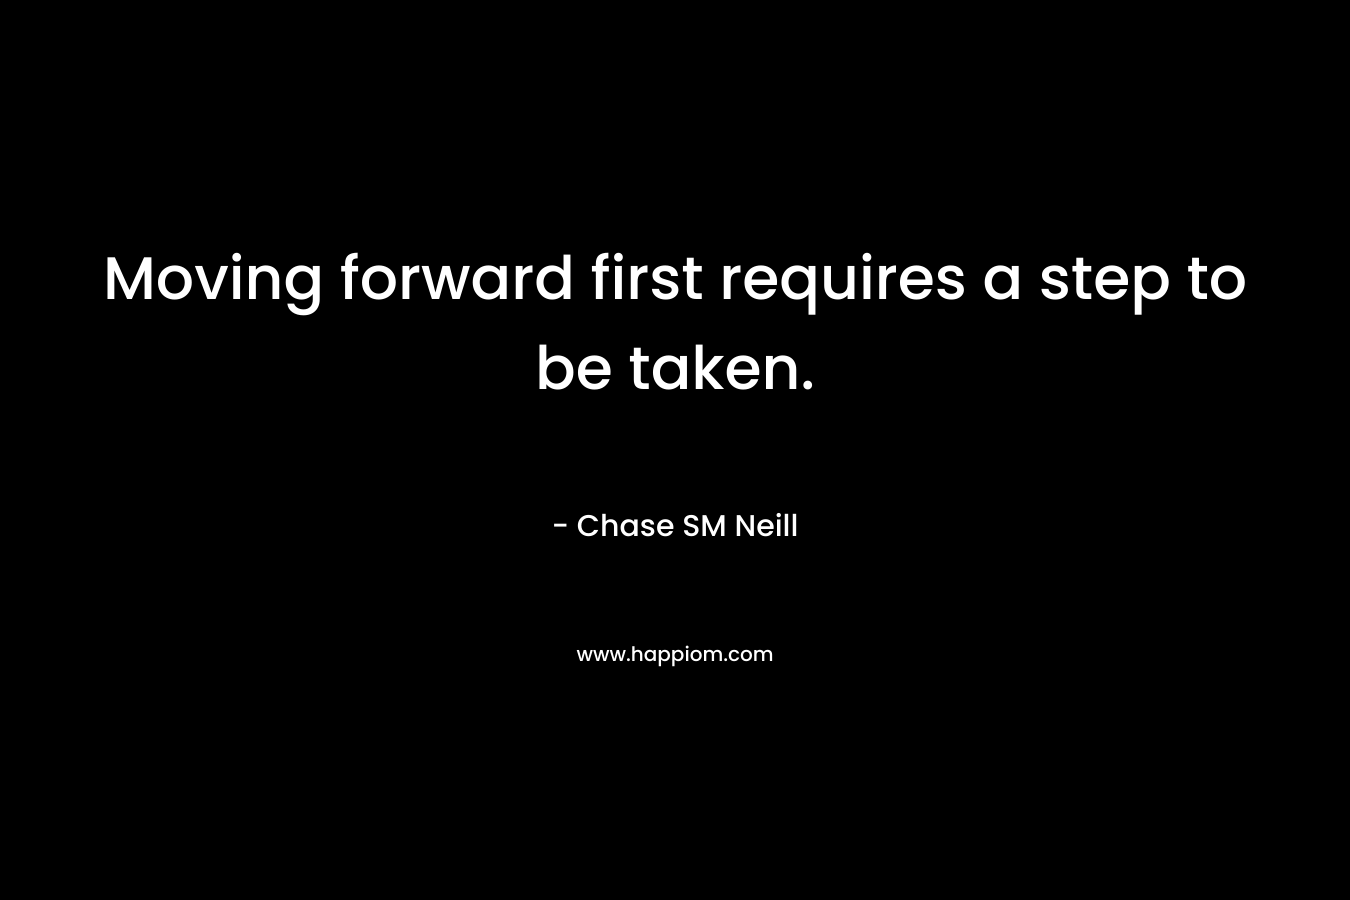 Moving forward first requires a step to be taken.